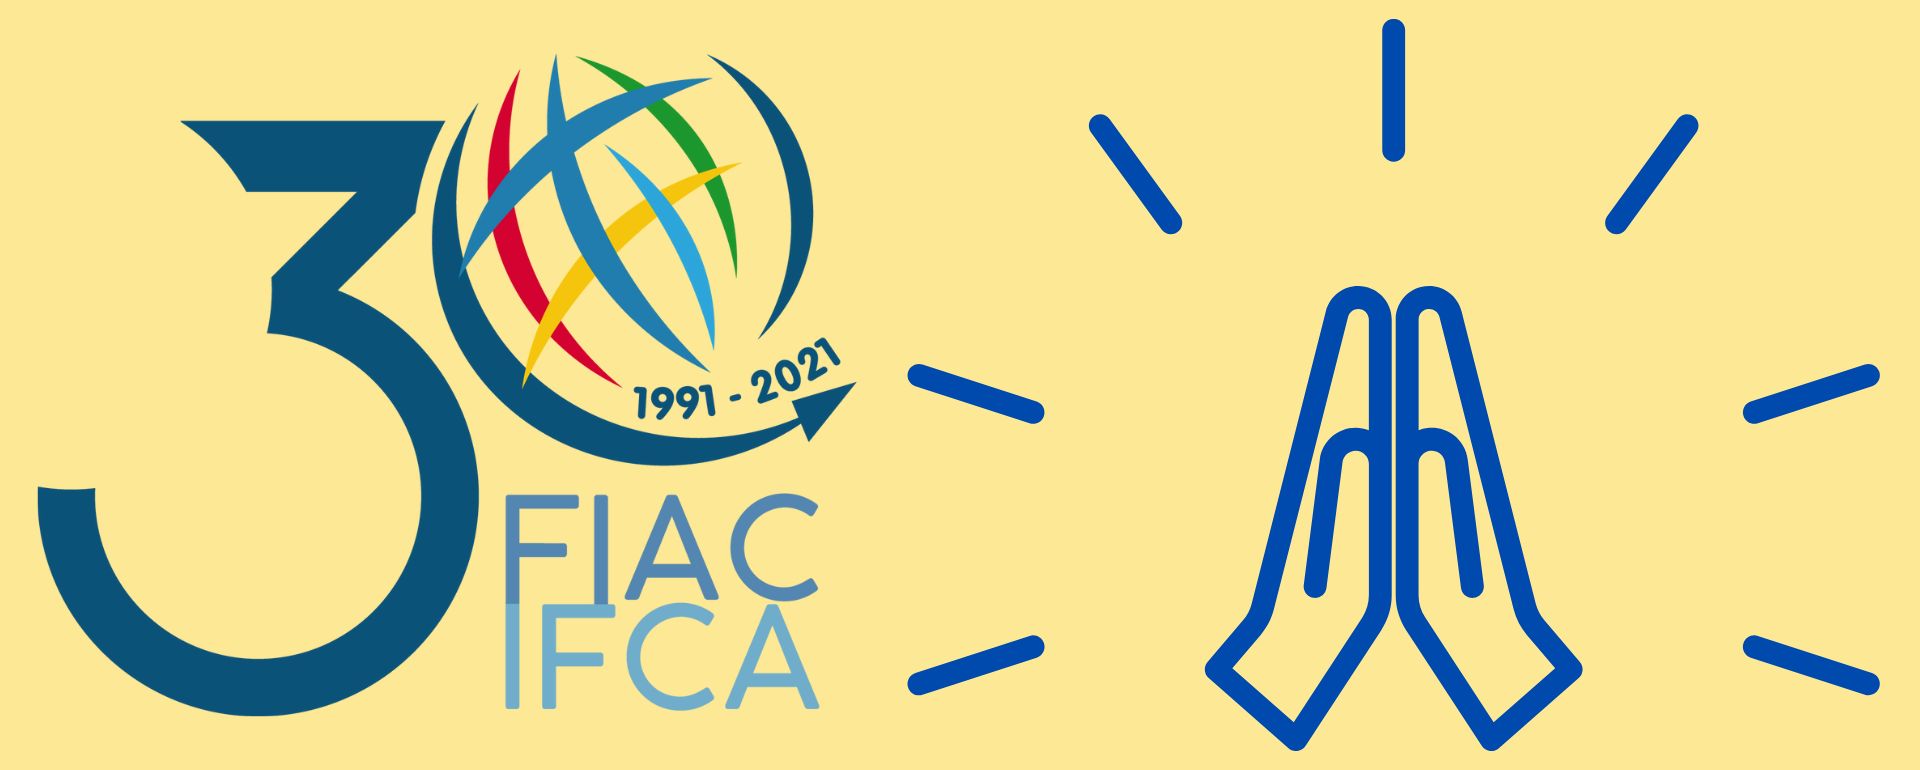 Prayer for the 30th Anniversary of IFCA